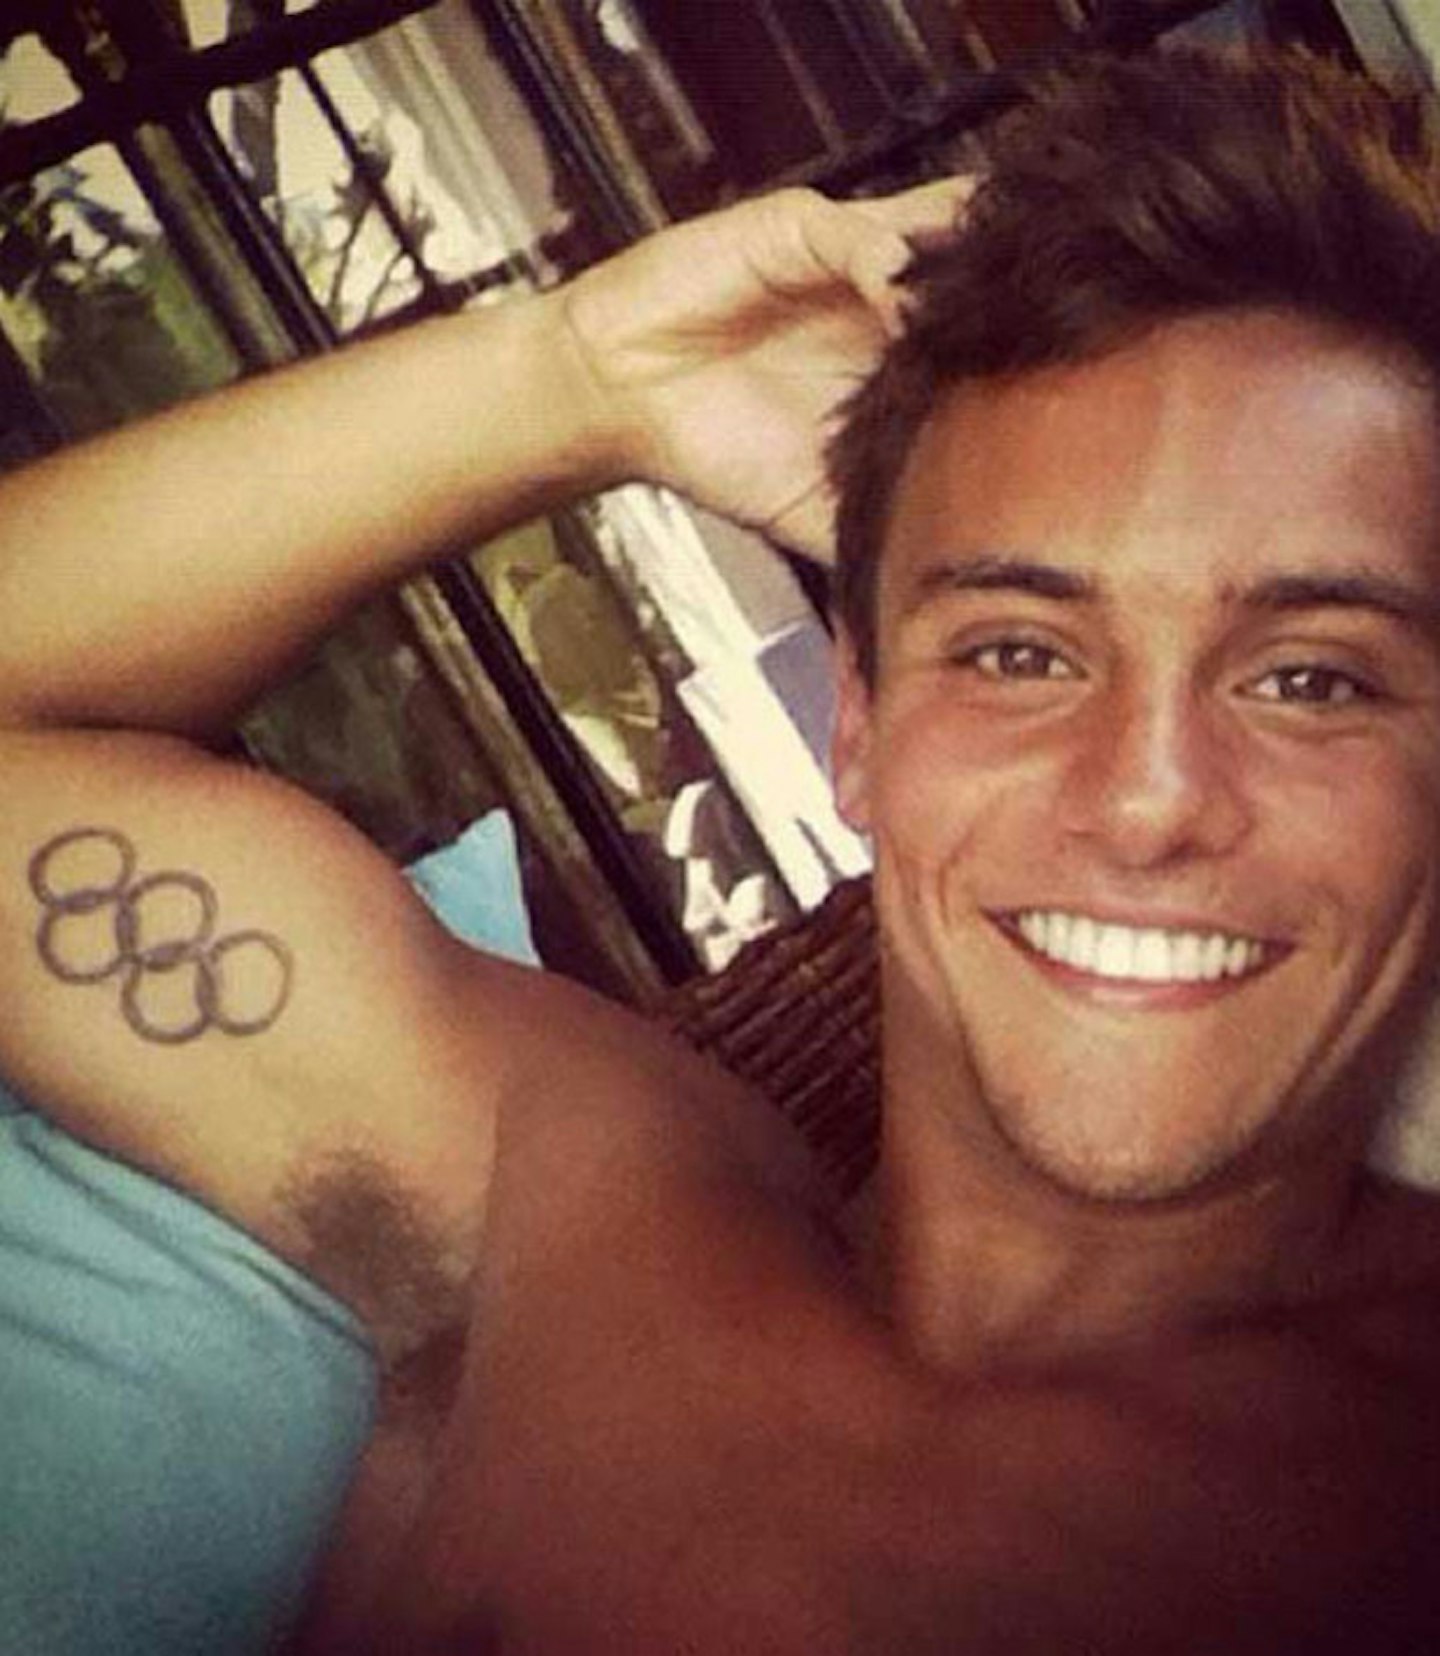 Tom Daley Naked Yup You Asked For It – Heres That Picture And A